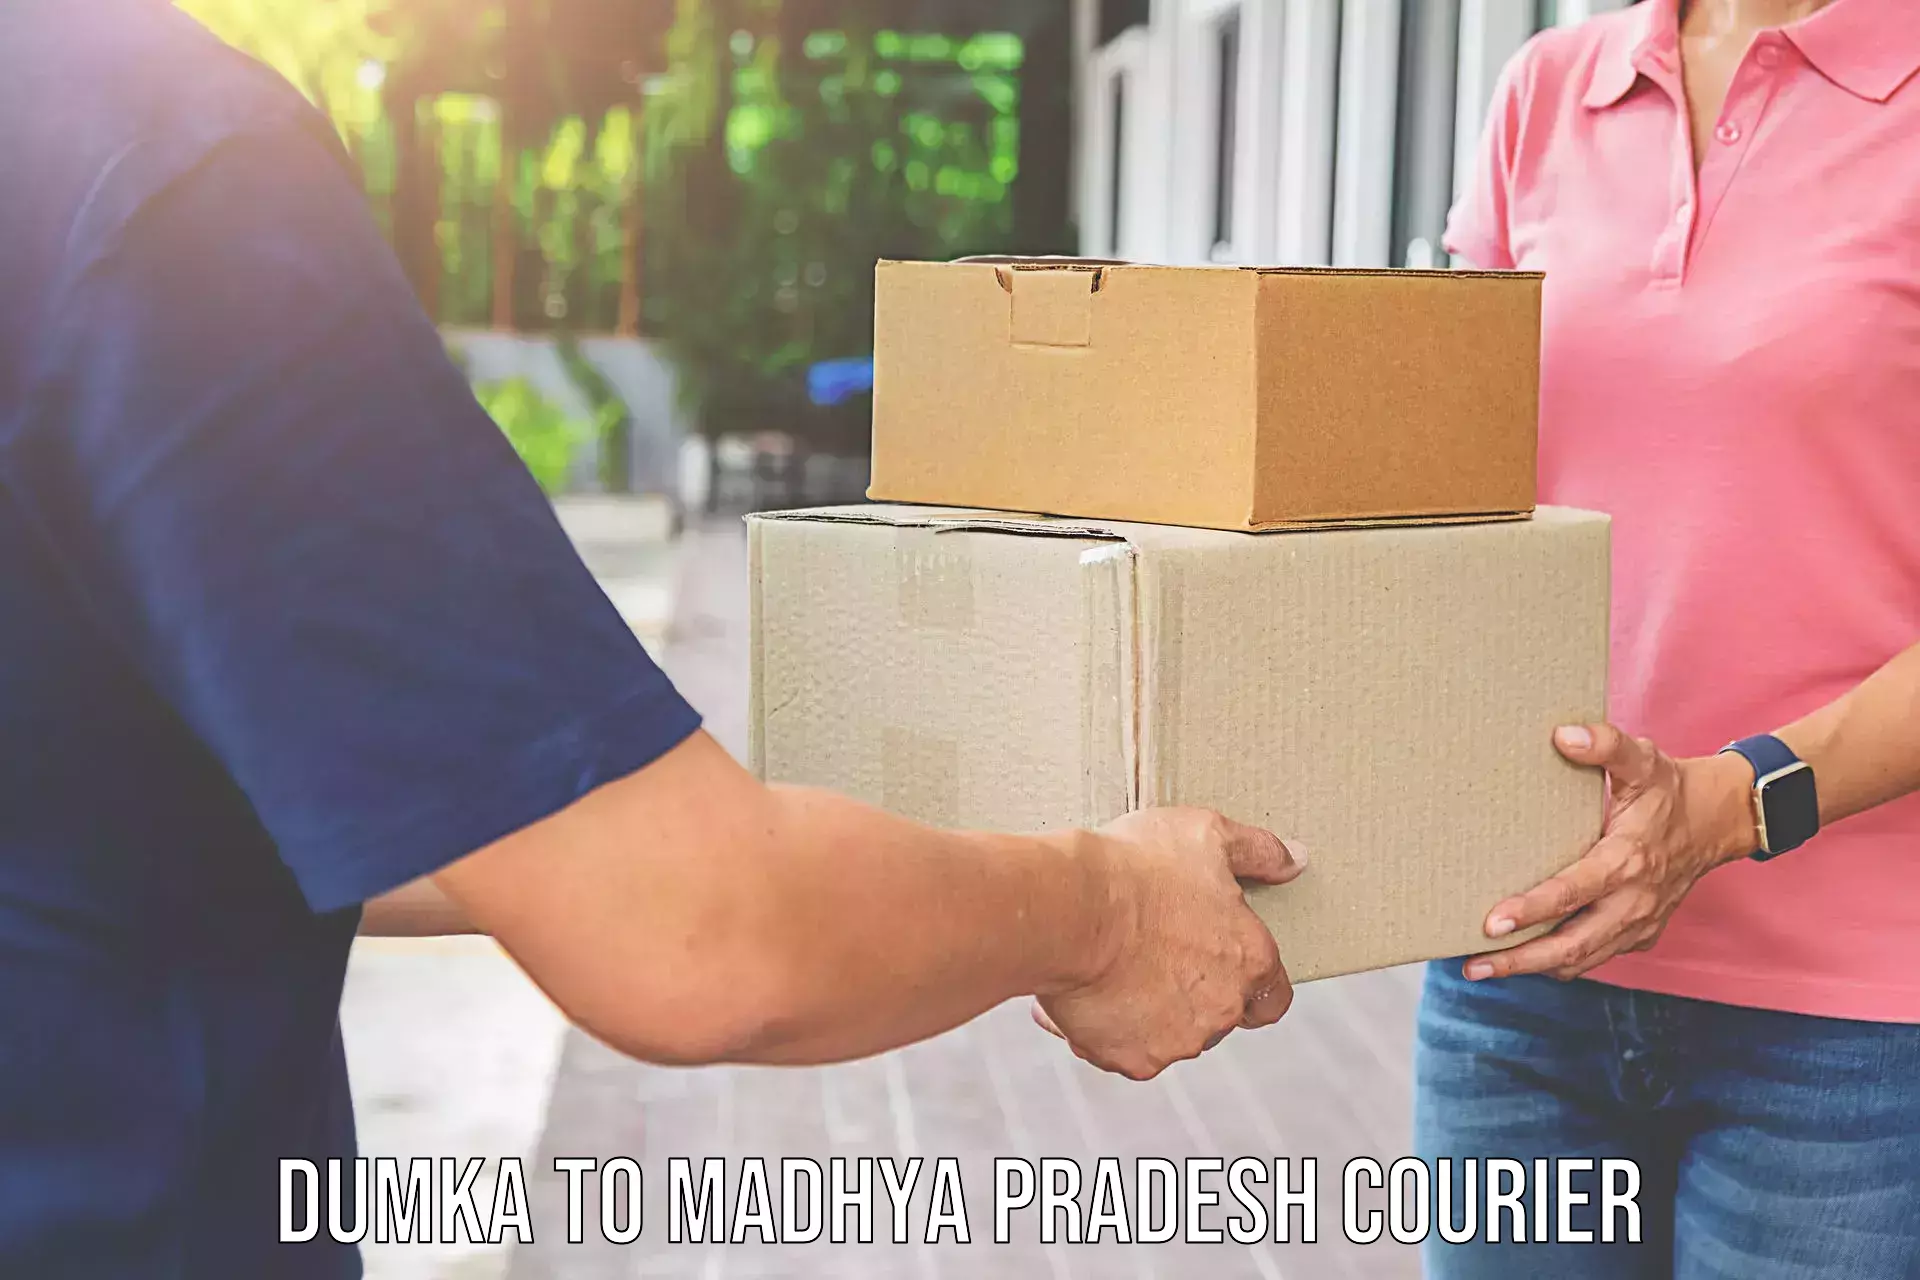 Furniture delivery service Dumka to IIT Indore